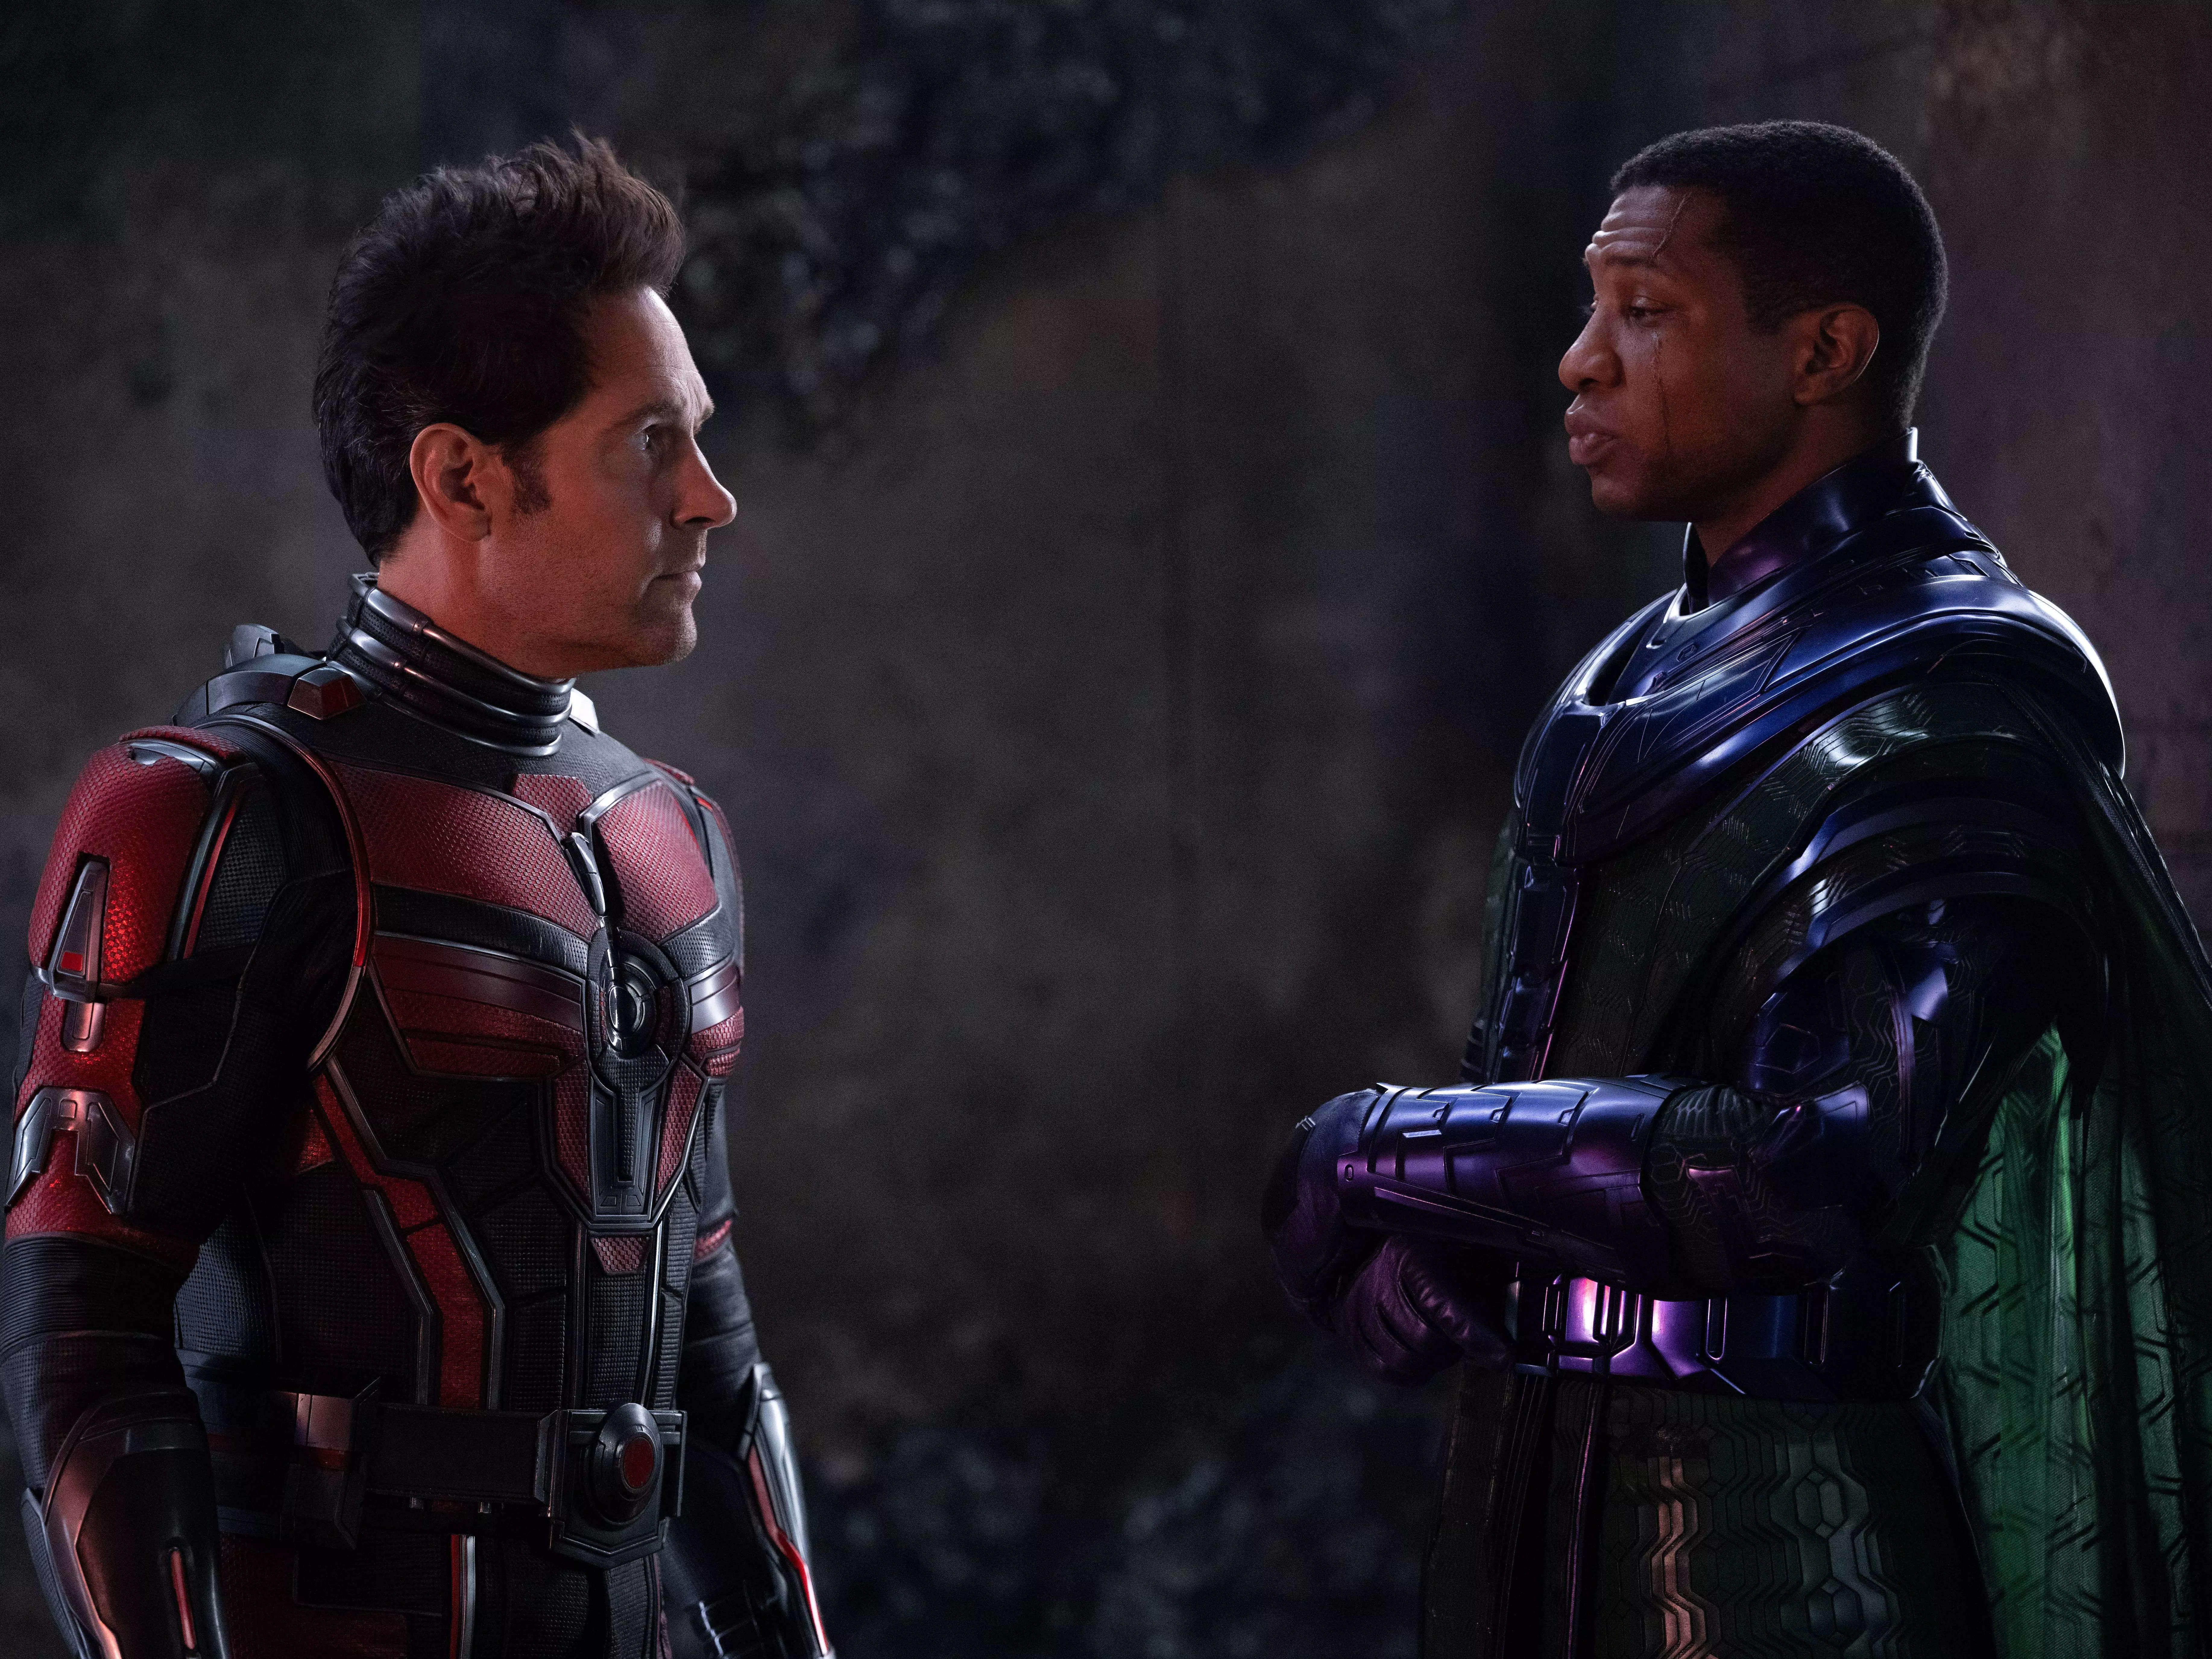 Paul Rudd as Scott Lang/Ant-Man and Jonathan Majors as Kang the Conqueror in "Ant-Man and the Wasp: Quantumania."